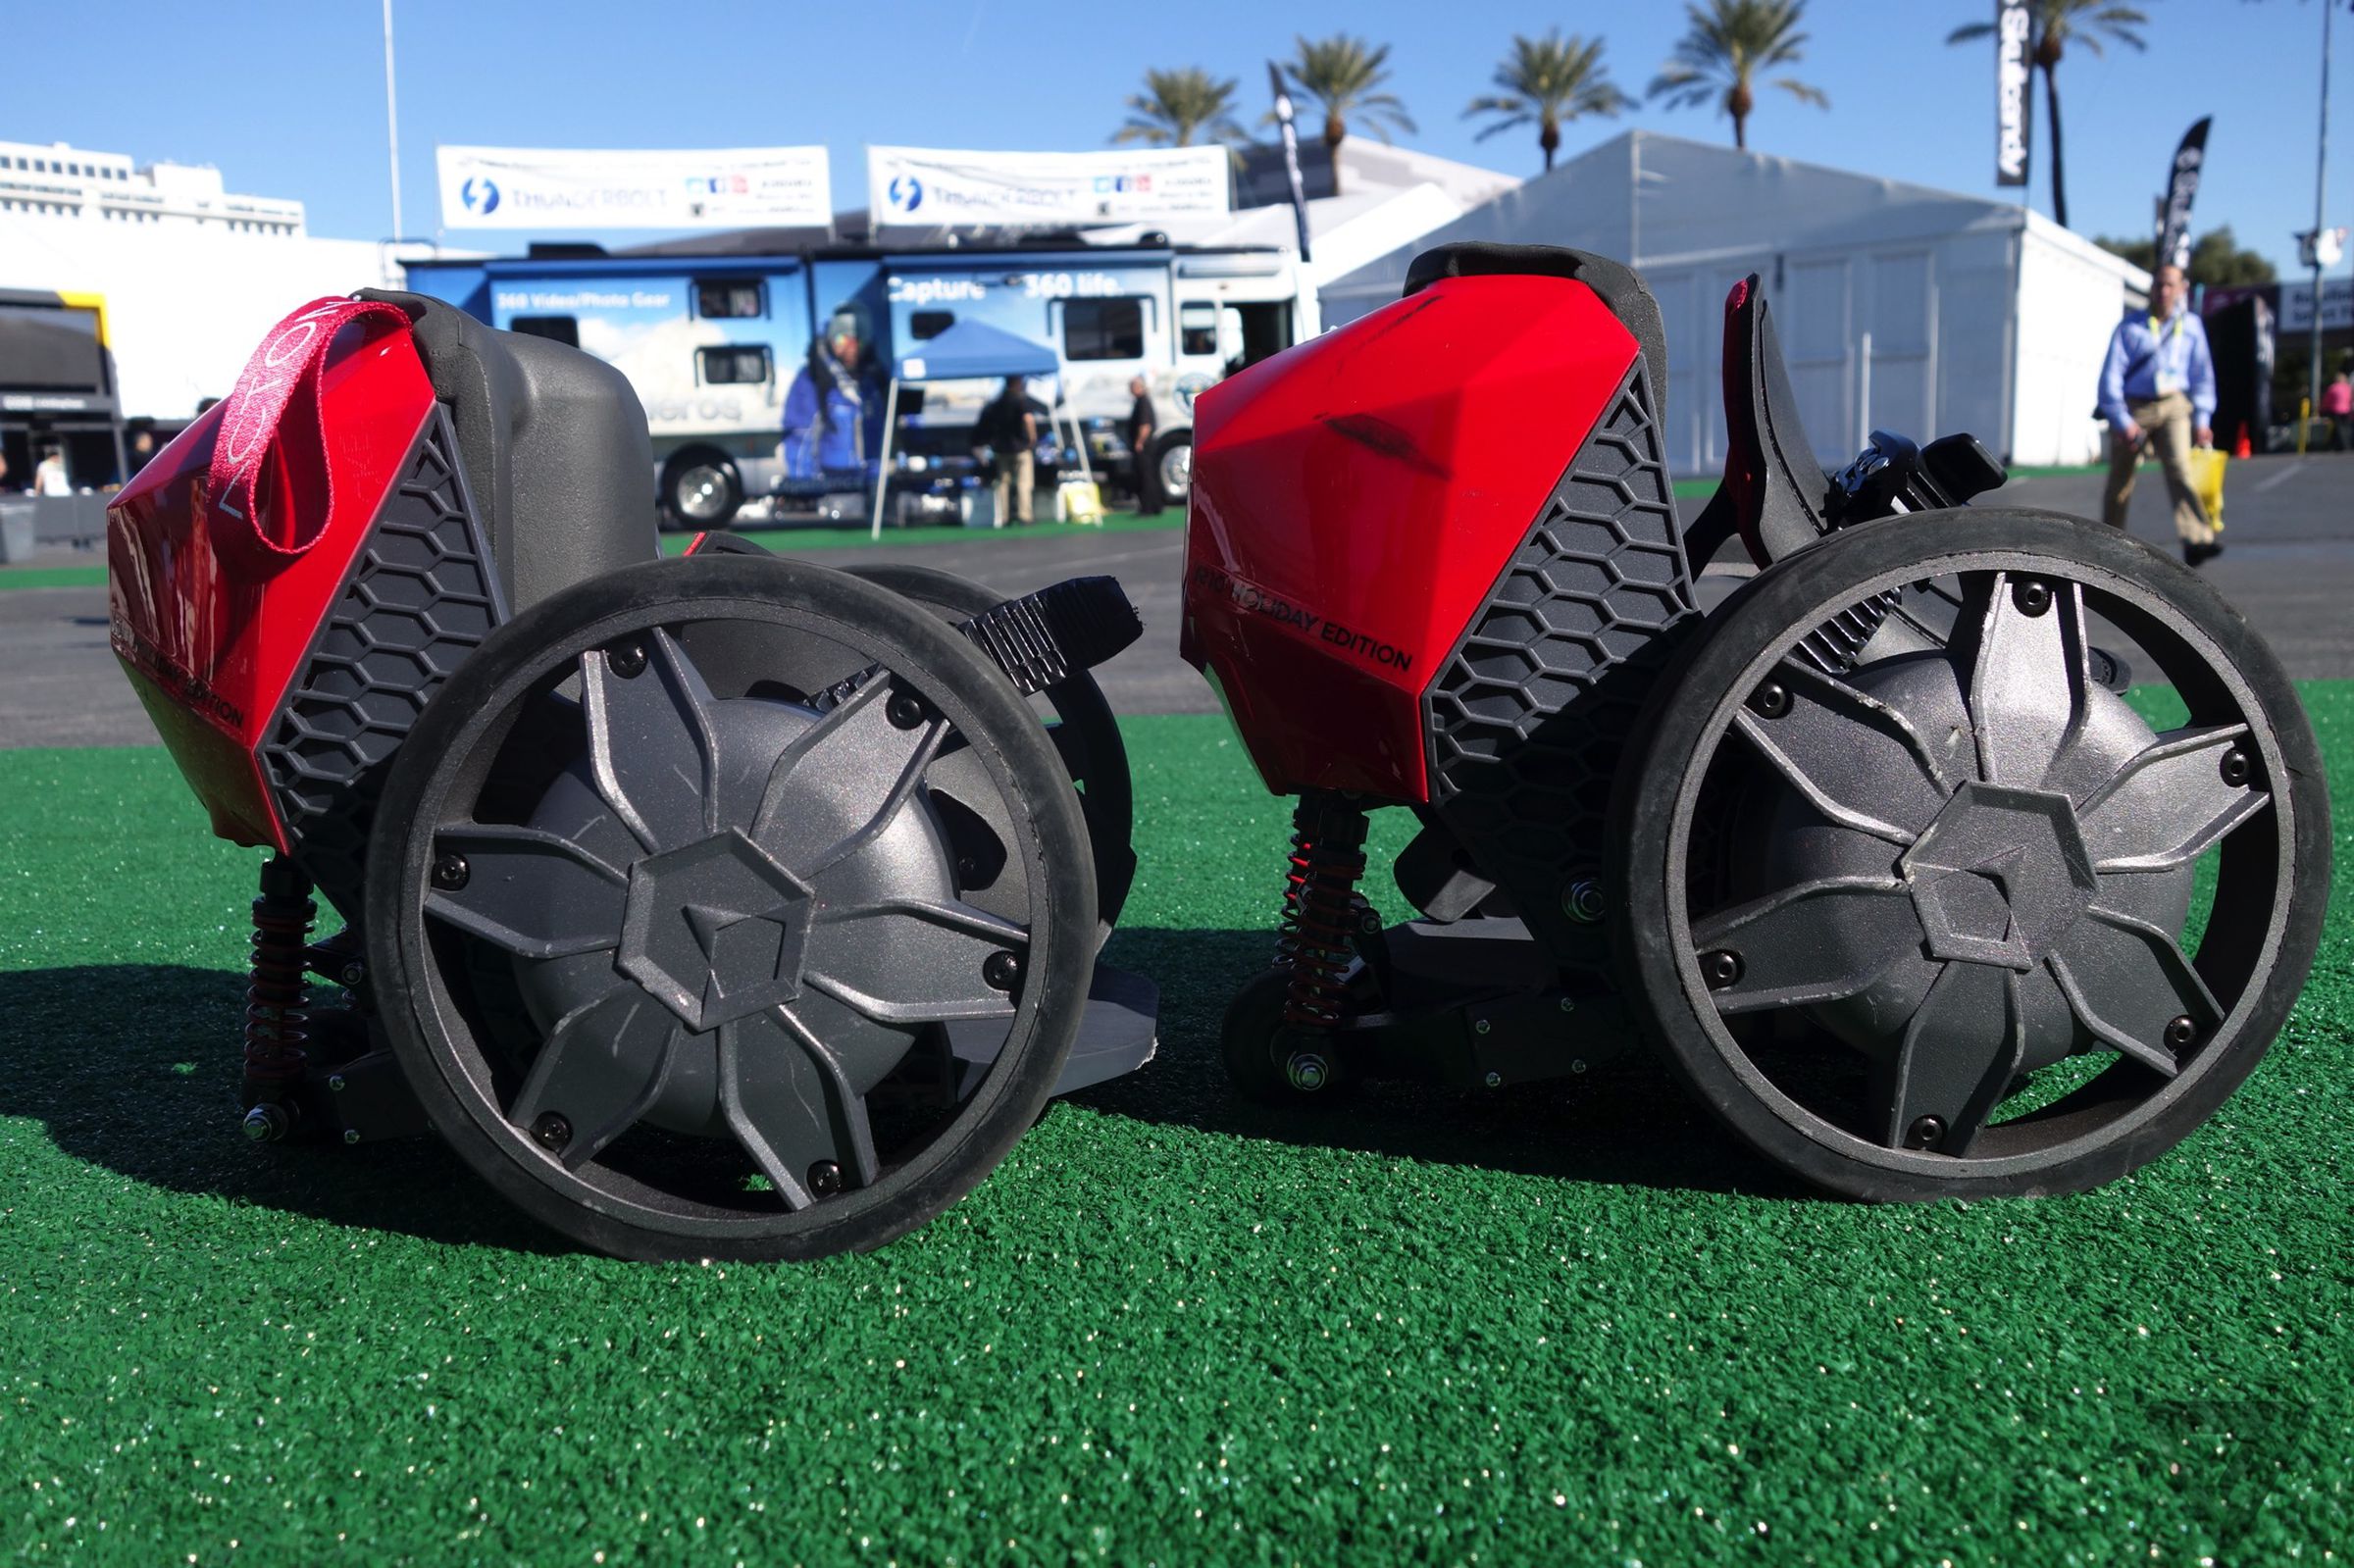 RocketSkates hands-on pictures at CES 2015